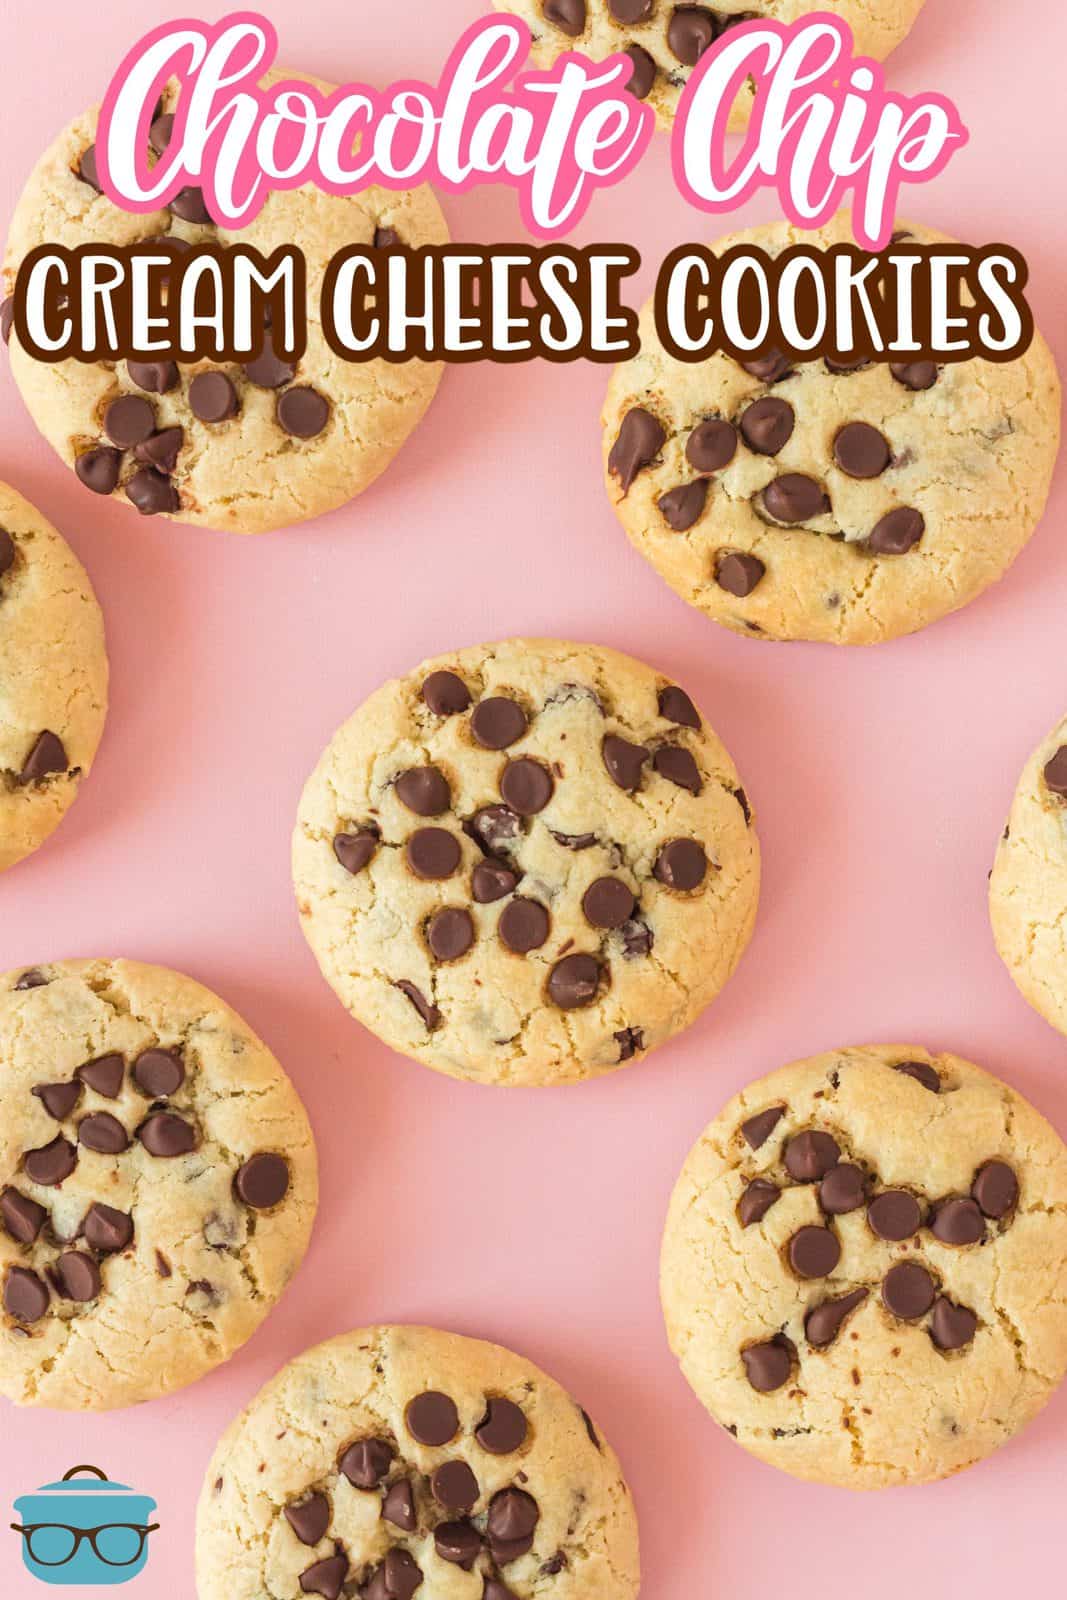 Pinterest image of Chocolate Chip Cream Cheese Cookies on pink background.